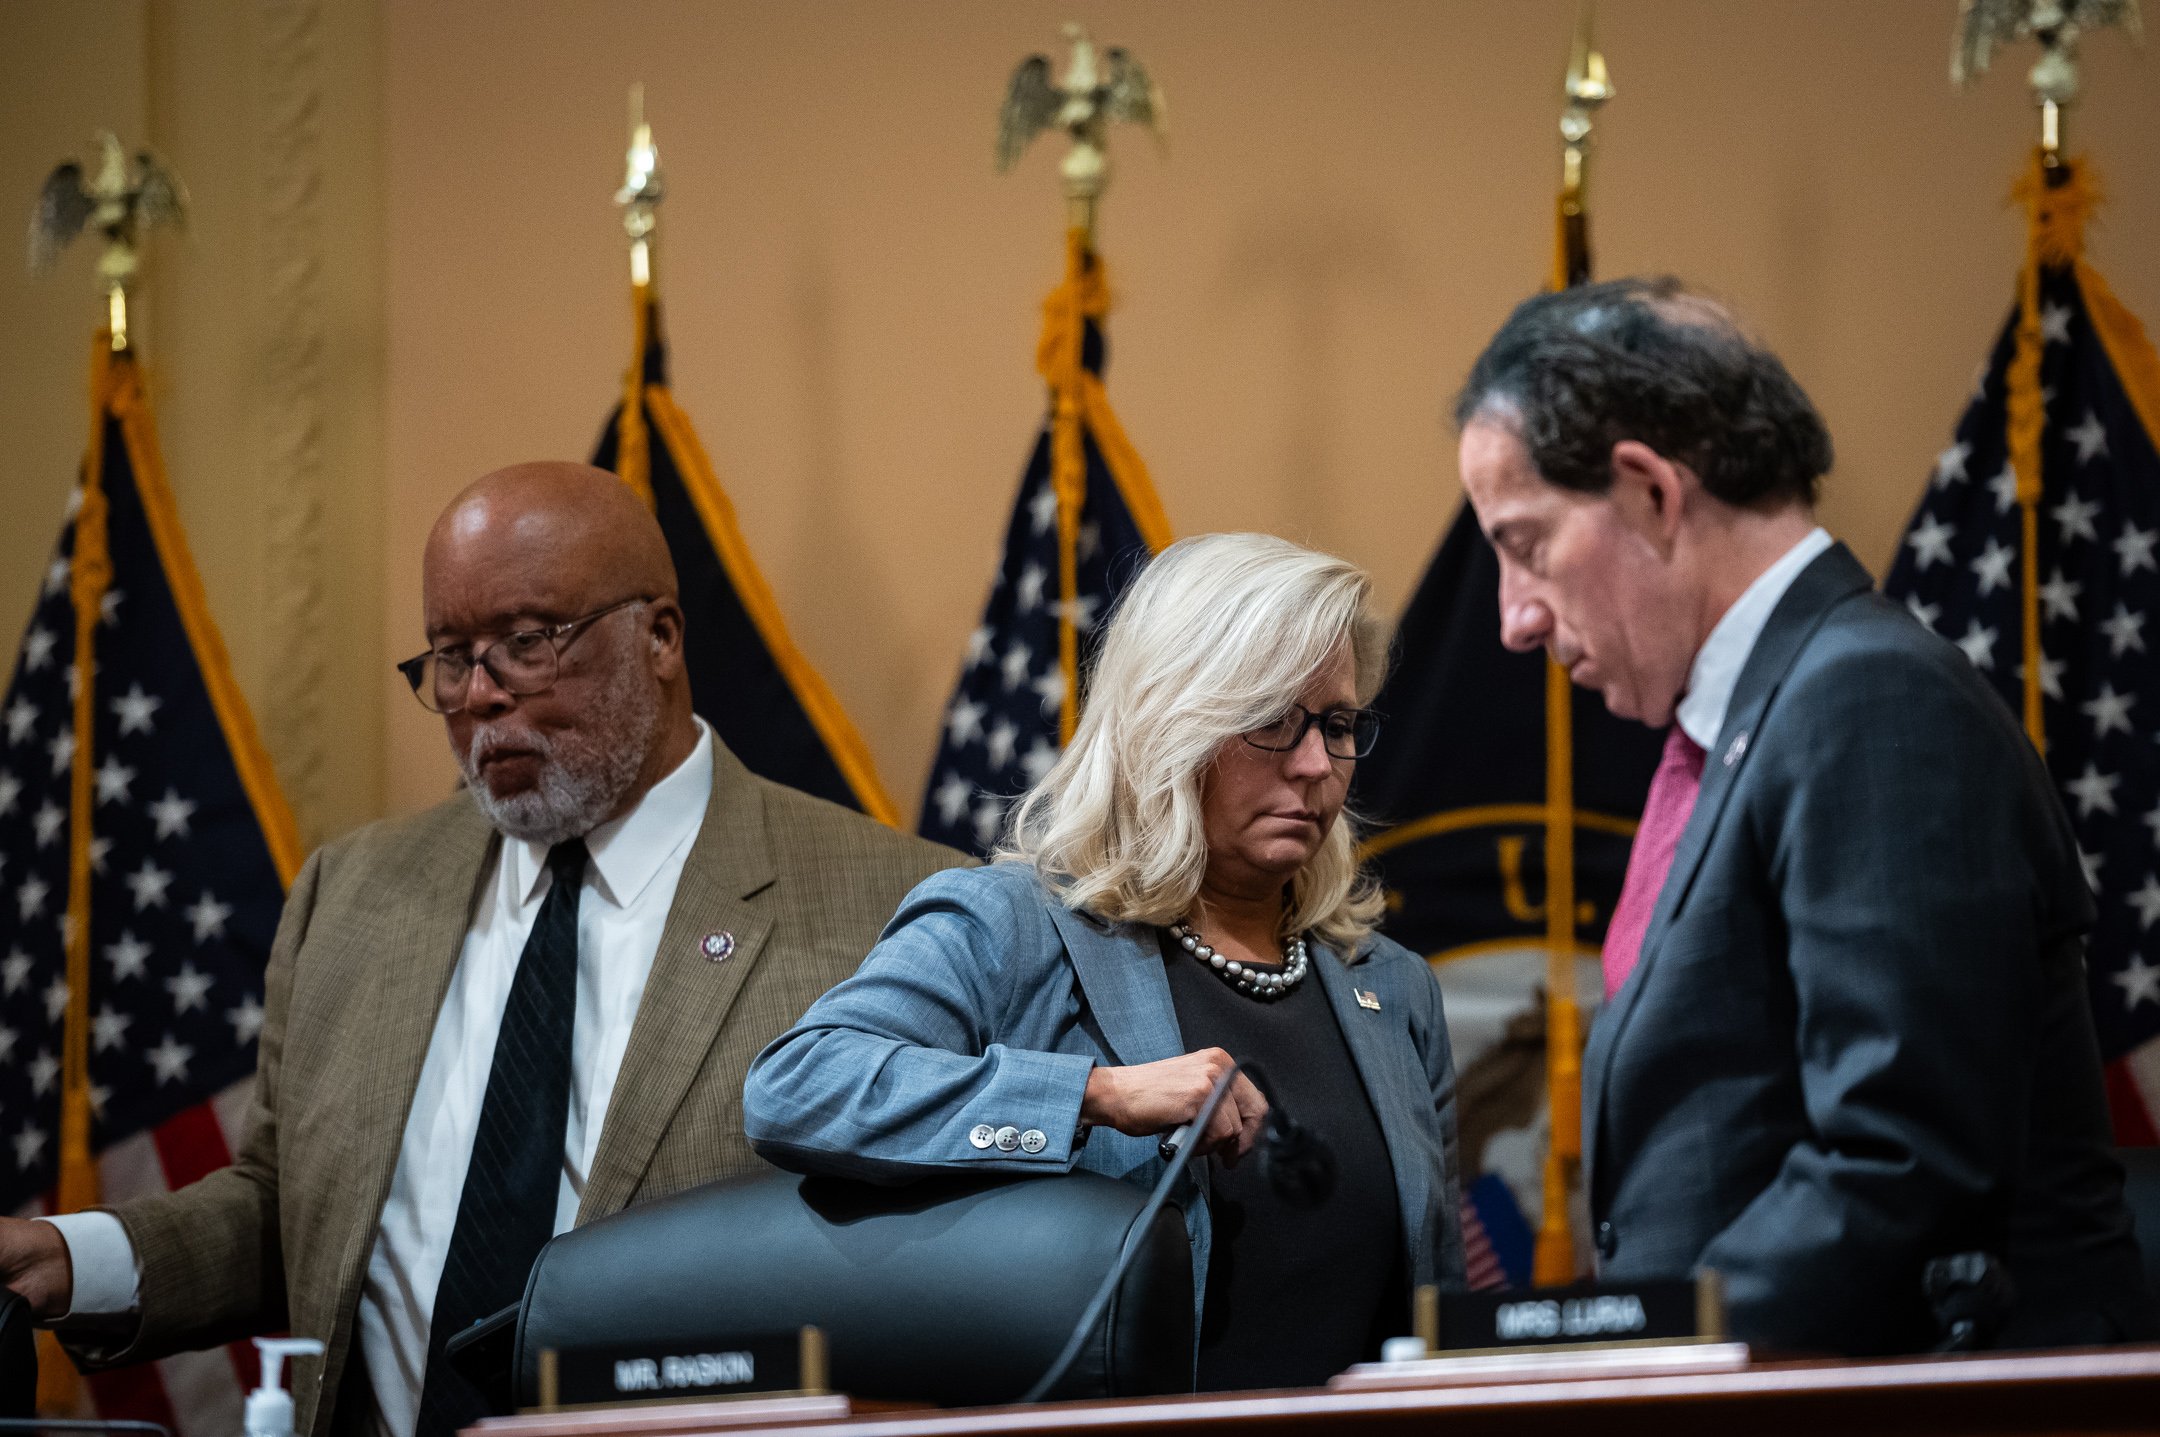  Representative Bennie Thompson (D-MS), Committee Chair, Representative Liz Cheney (R-WY), Ranking Member, and Representative Jamie Raskin (D-MD) depart a House Select Committee to Investigate the January 6th Attack on the Capitol hearing, at the U.S